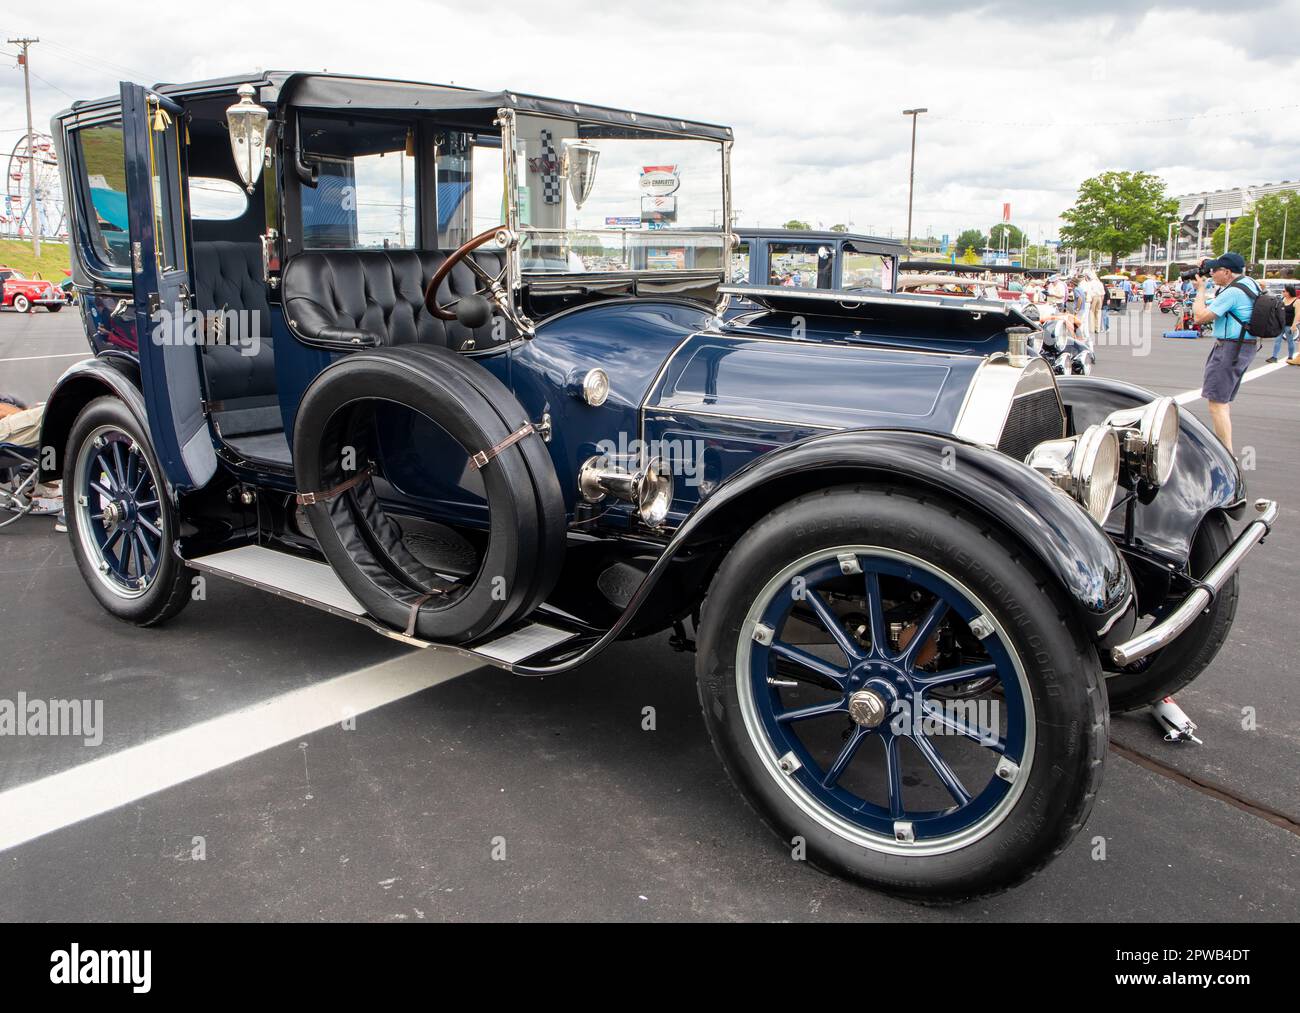 A restored 1915 Pierce Arrow automobile on display at a classic car show. Stock Photo